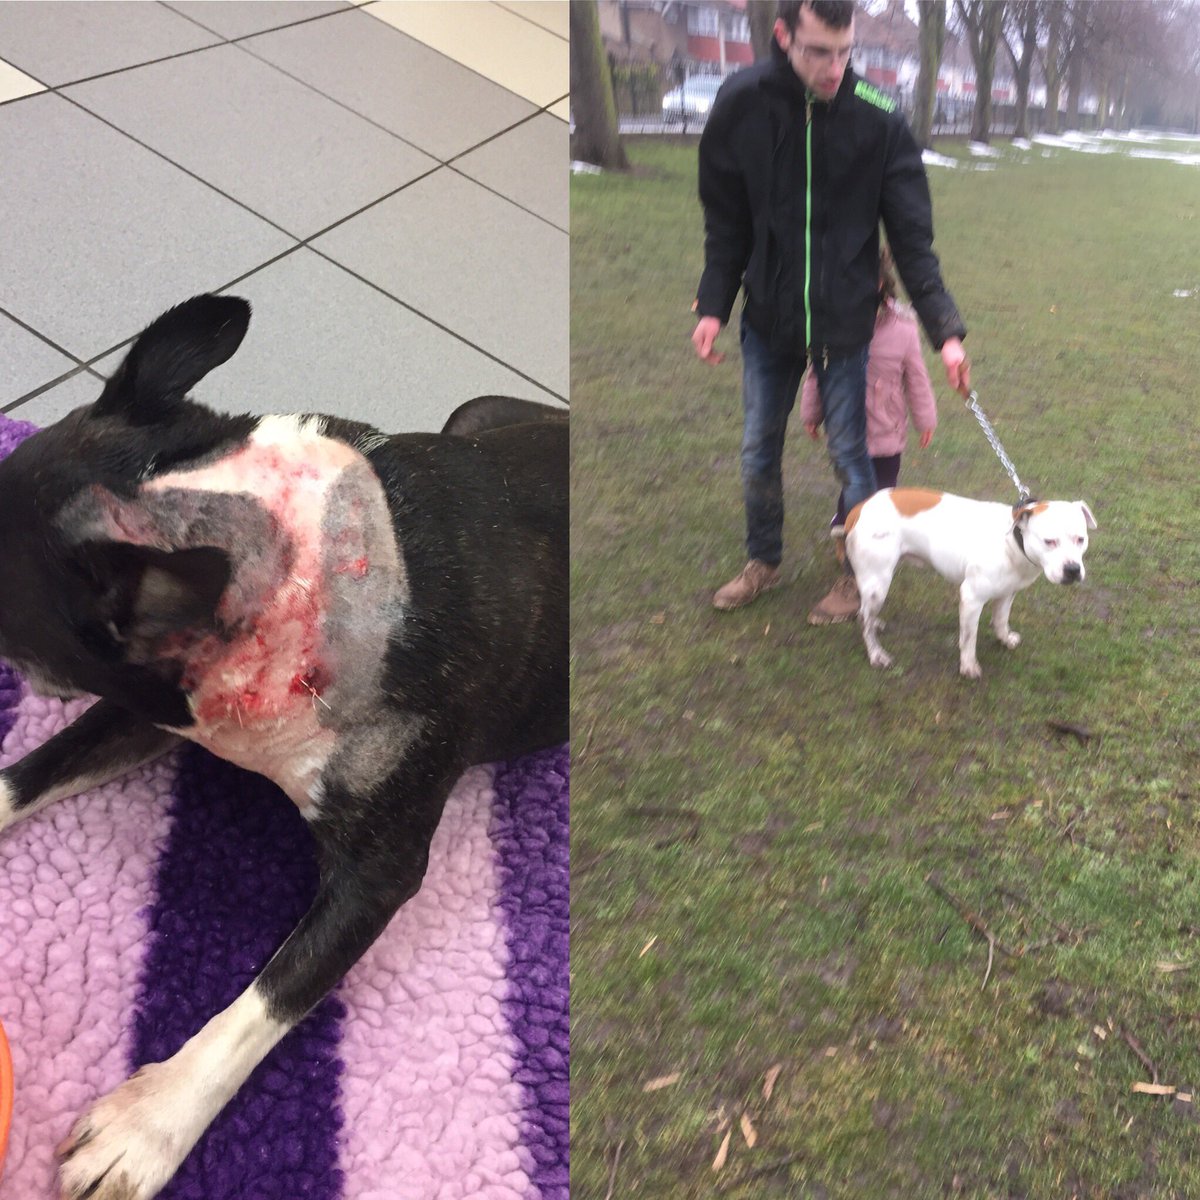 Dog owners walkers #charltonpark #charltonhouse keep a look out for this dog who launched an unprovoked attack and almost killed my dog on sat eve whilst the owner stood and watched my partner trying to save him @CharltonBuzz @MPSGreenwich dog on dog attack so no crime committed